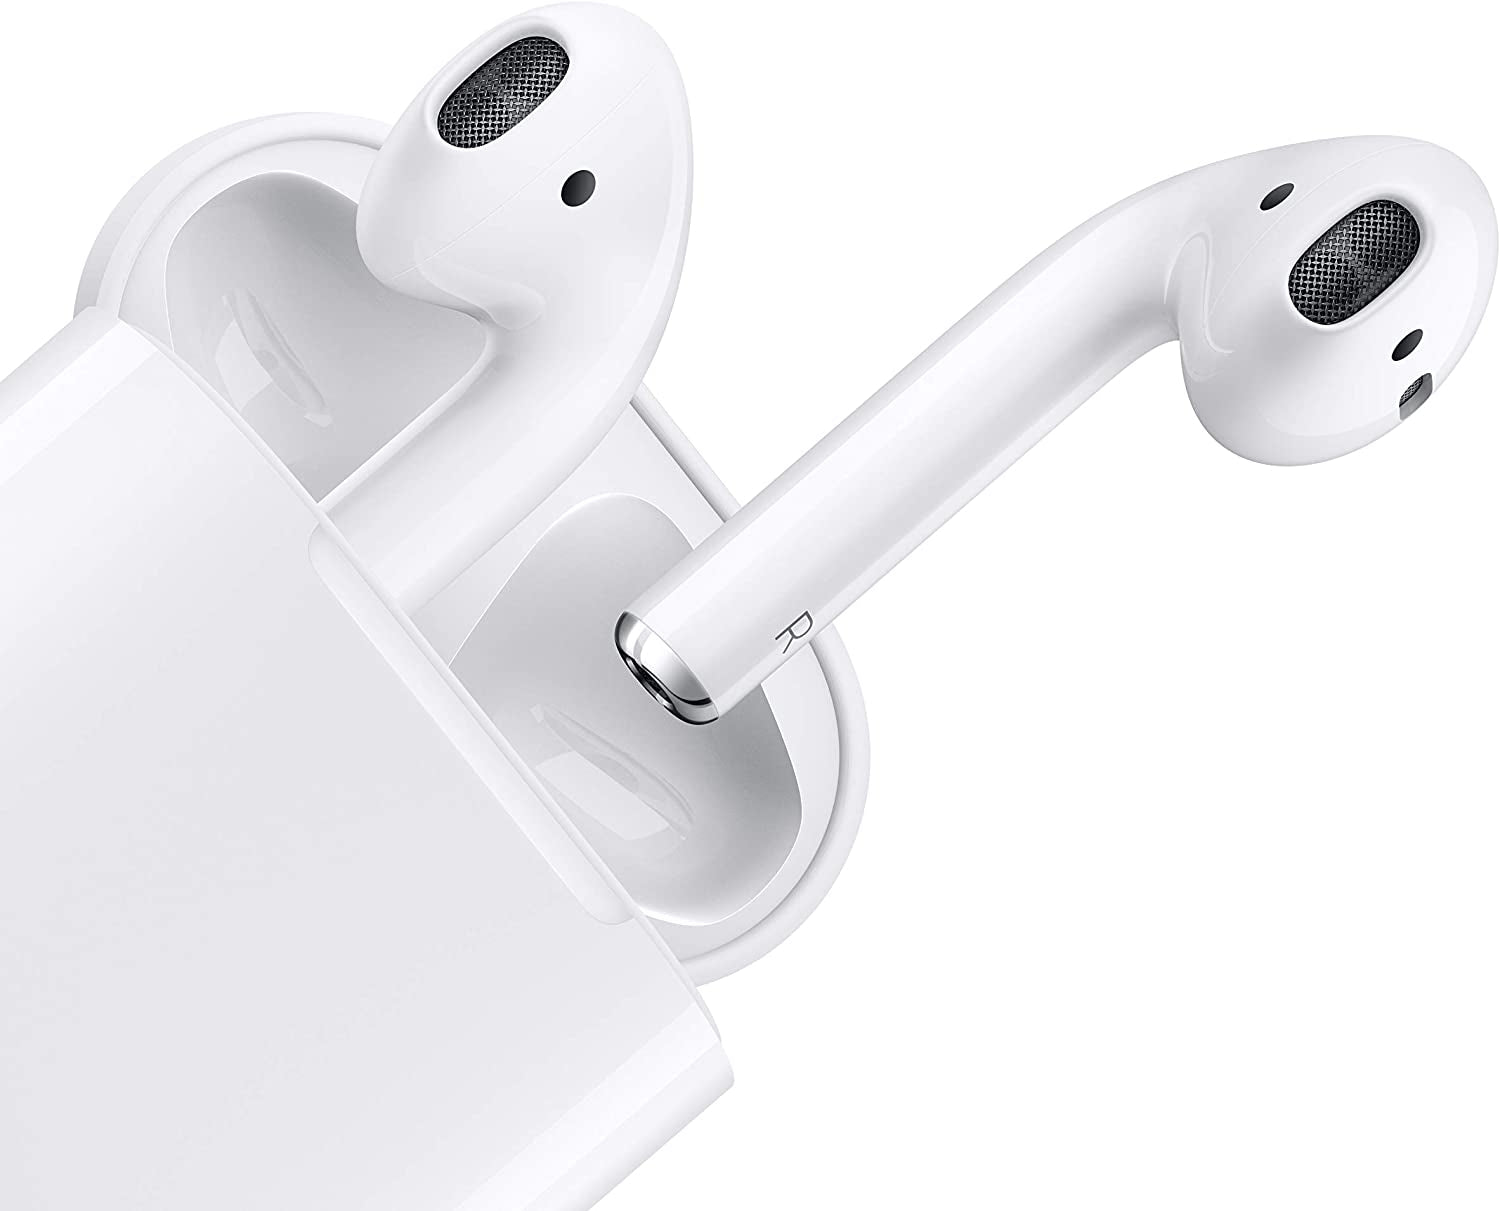 Airpods (2Nd Generation) Wireless Ear Buds, Bluetooth Headphones with Lightning Charging Case Included, over 24 Hours of Battery Life, Effortless Setup for Iphone